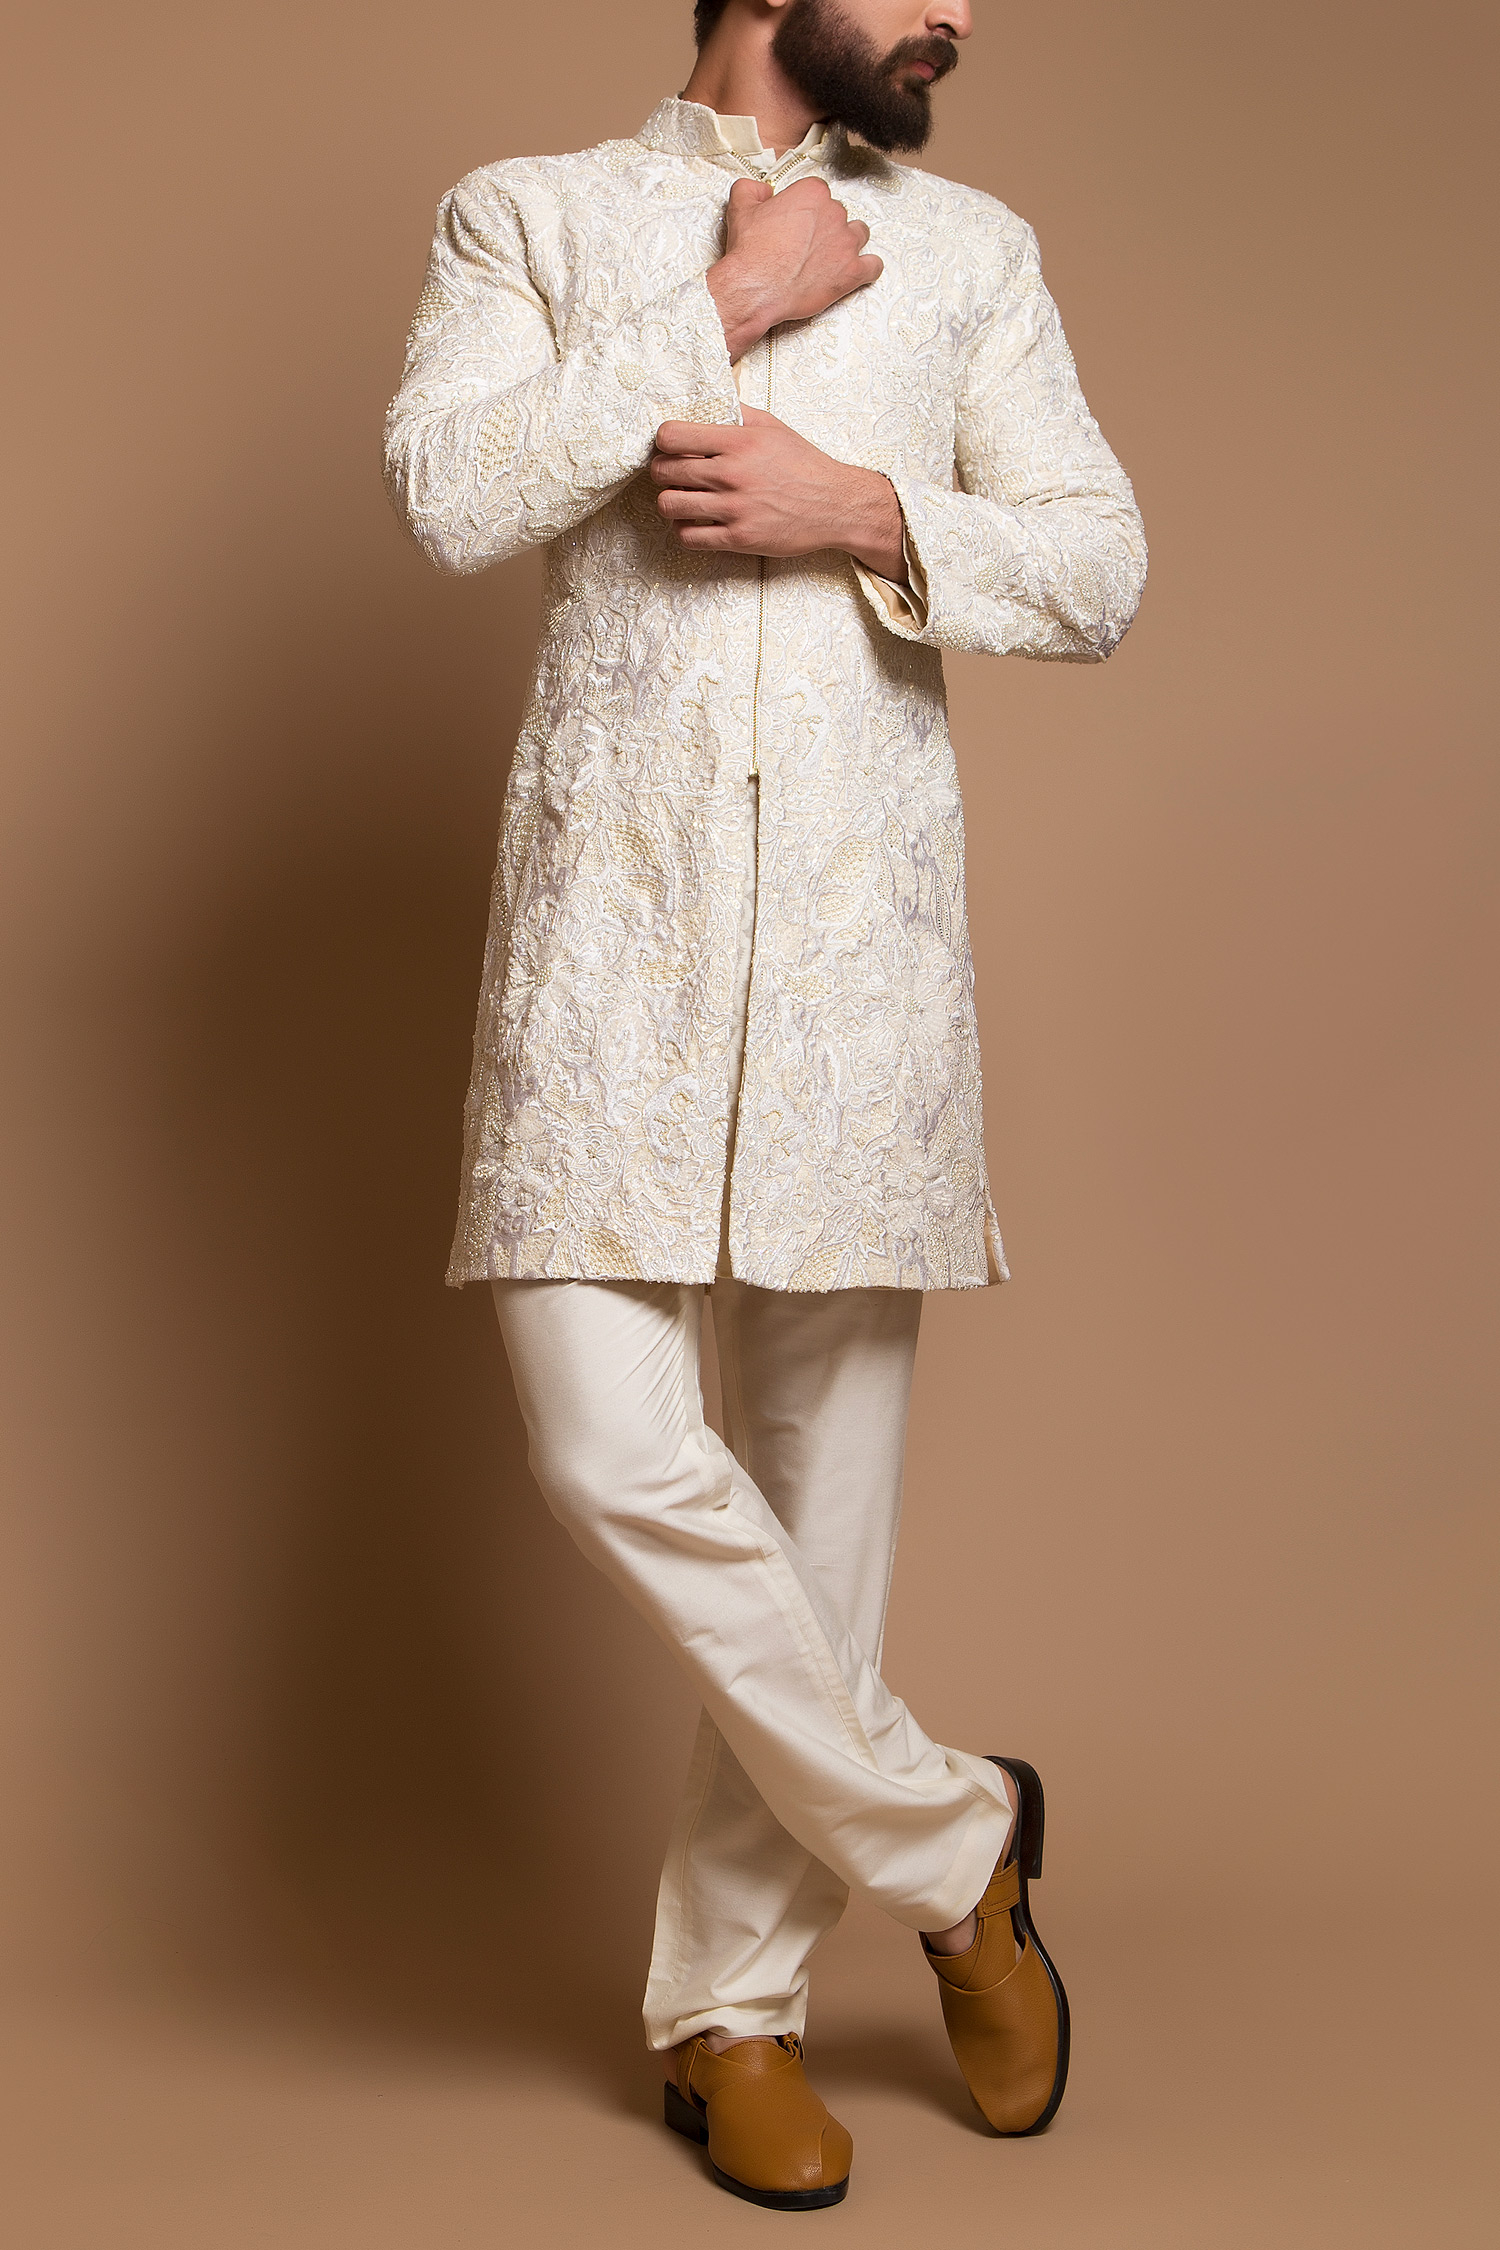 shoes for sherwani with heels